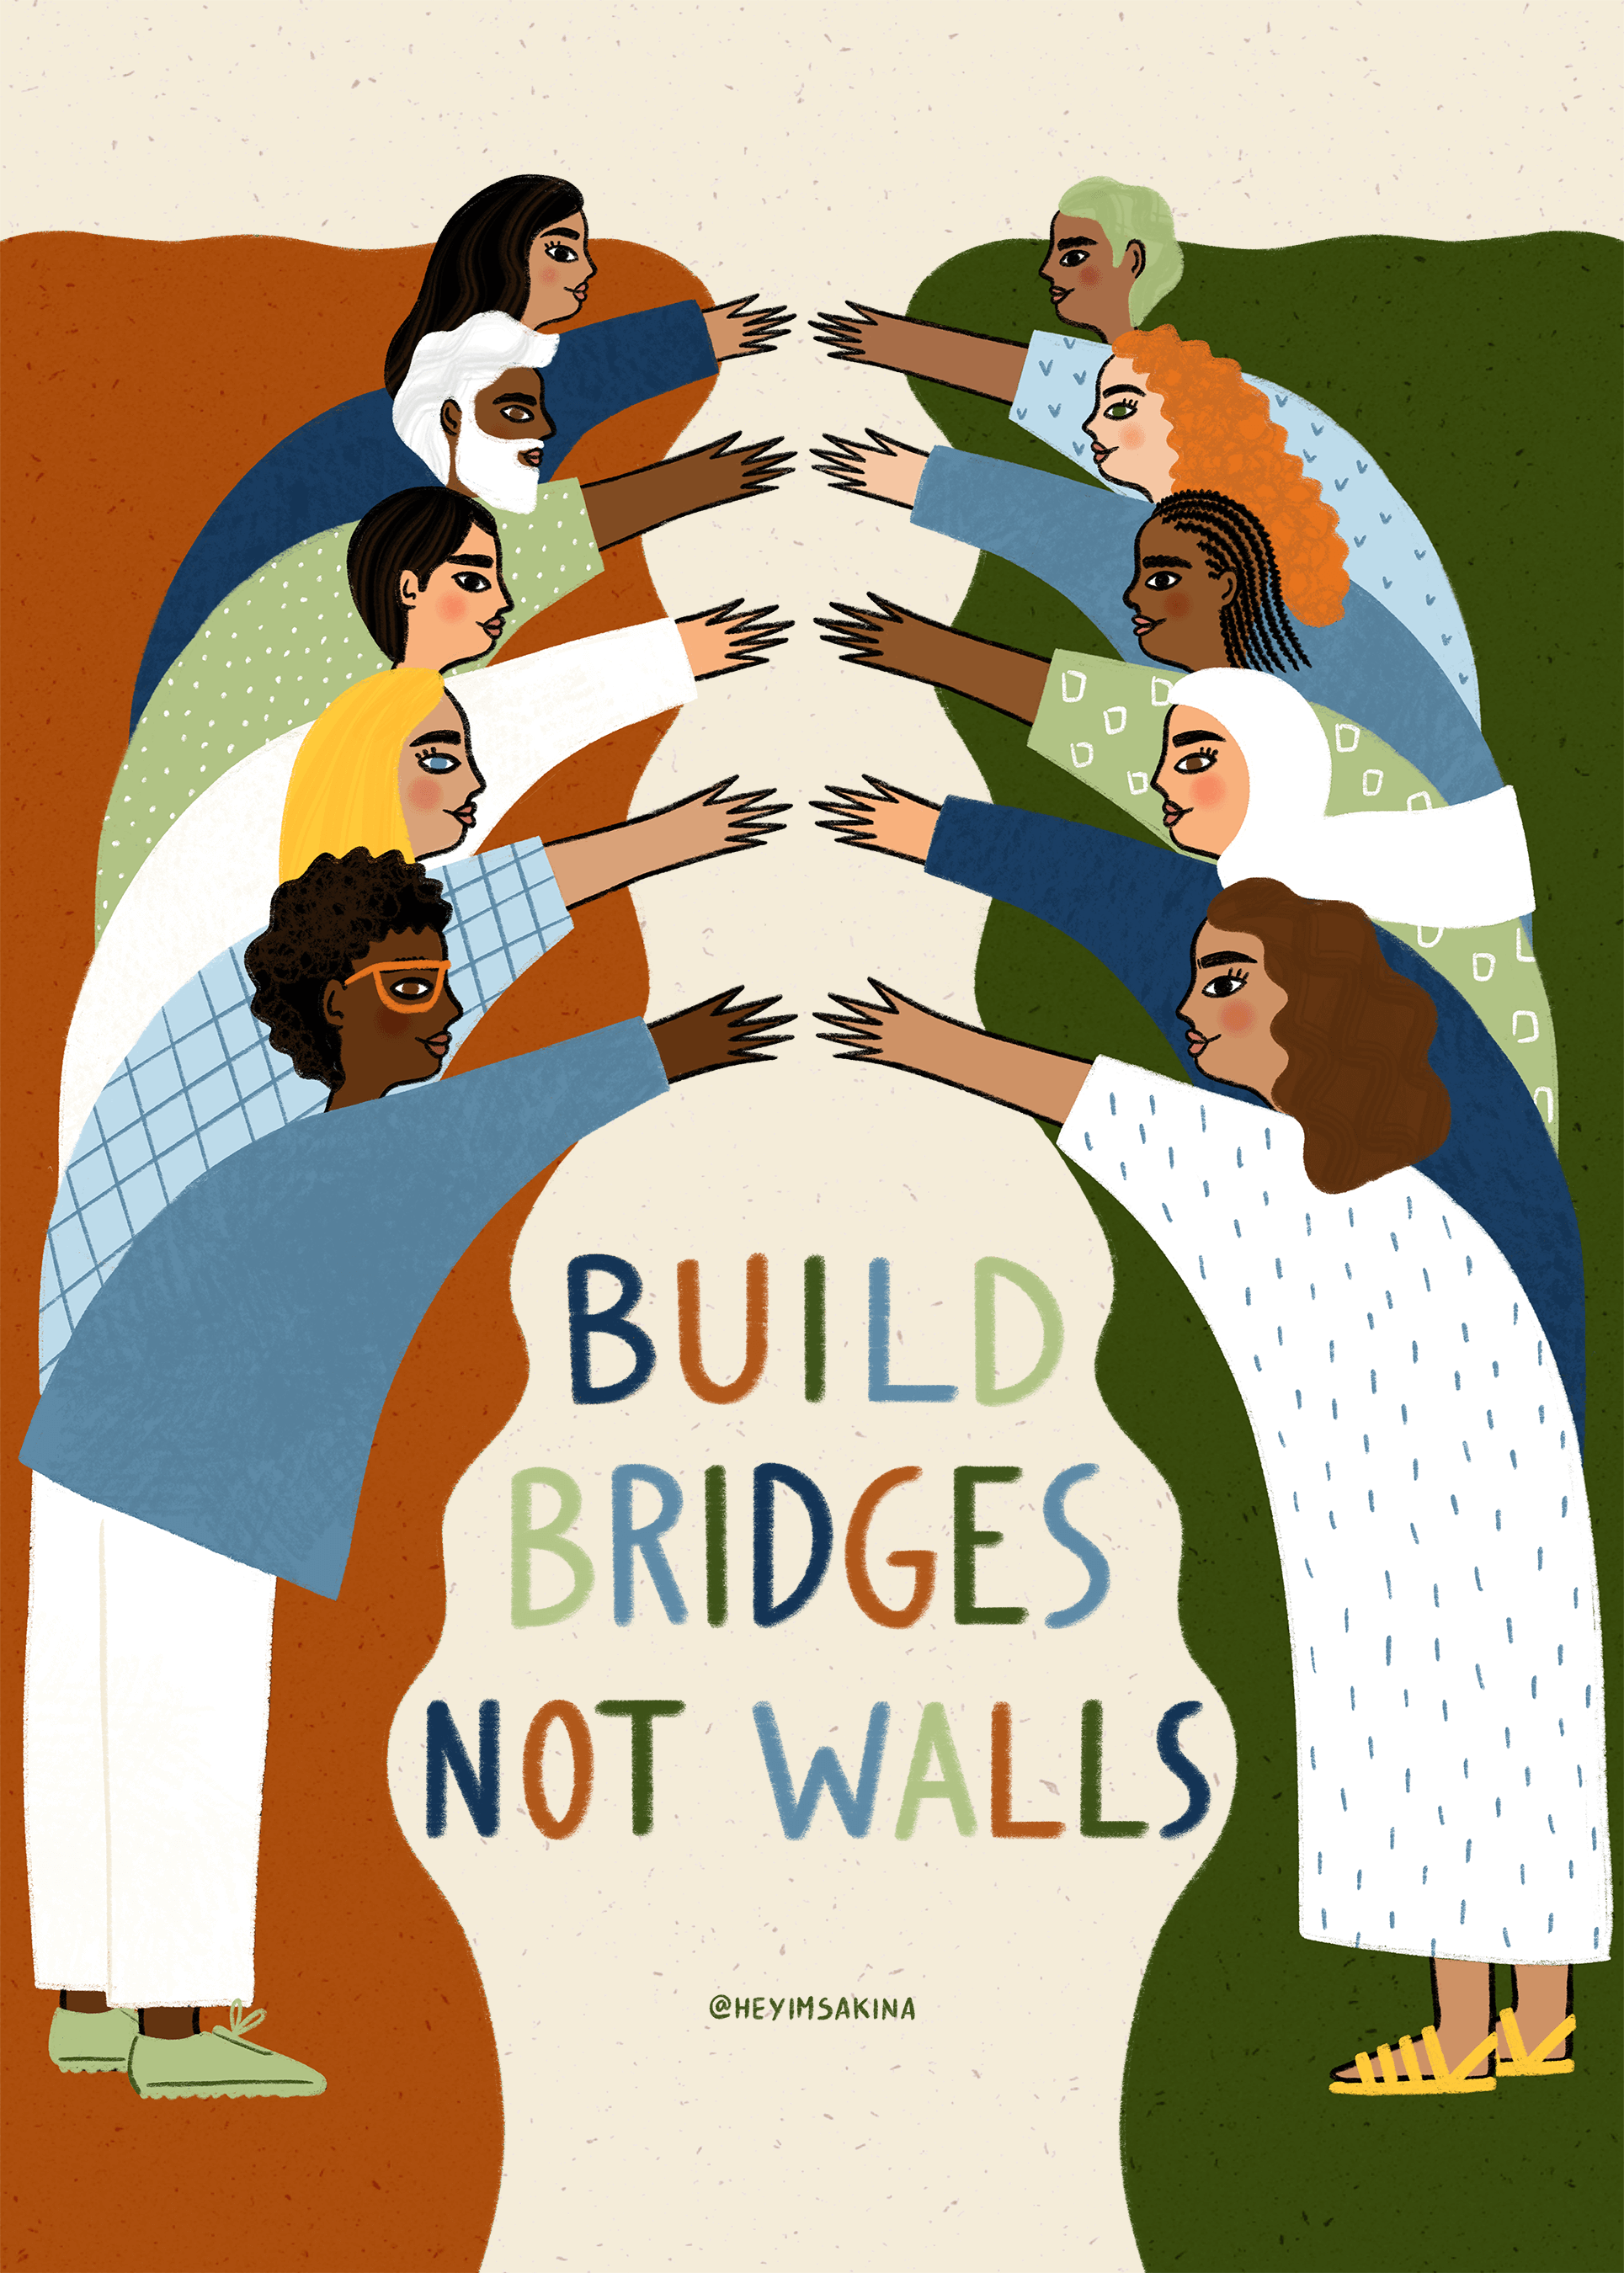 Illustration of a group of people stretching out to link hands over a gap. Big colorful text reads "Build Bridges, Not Walls."